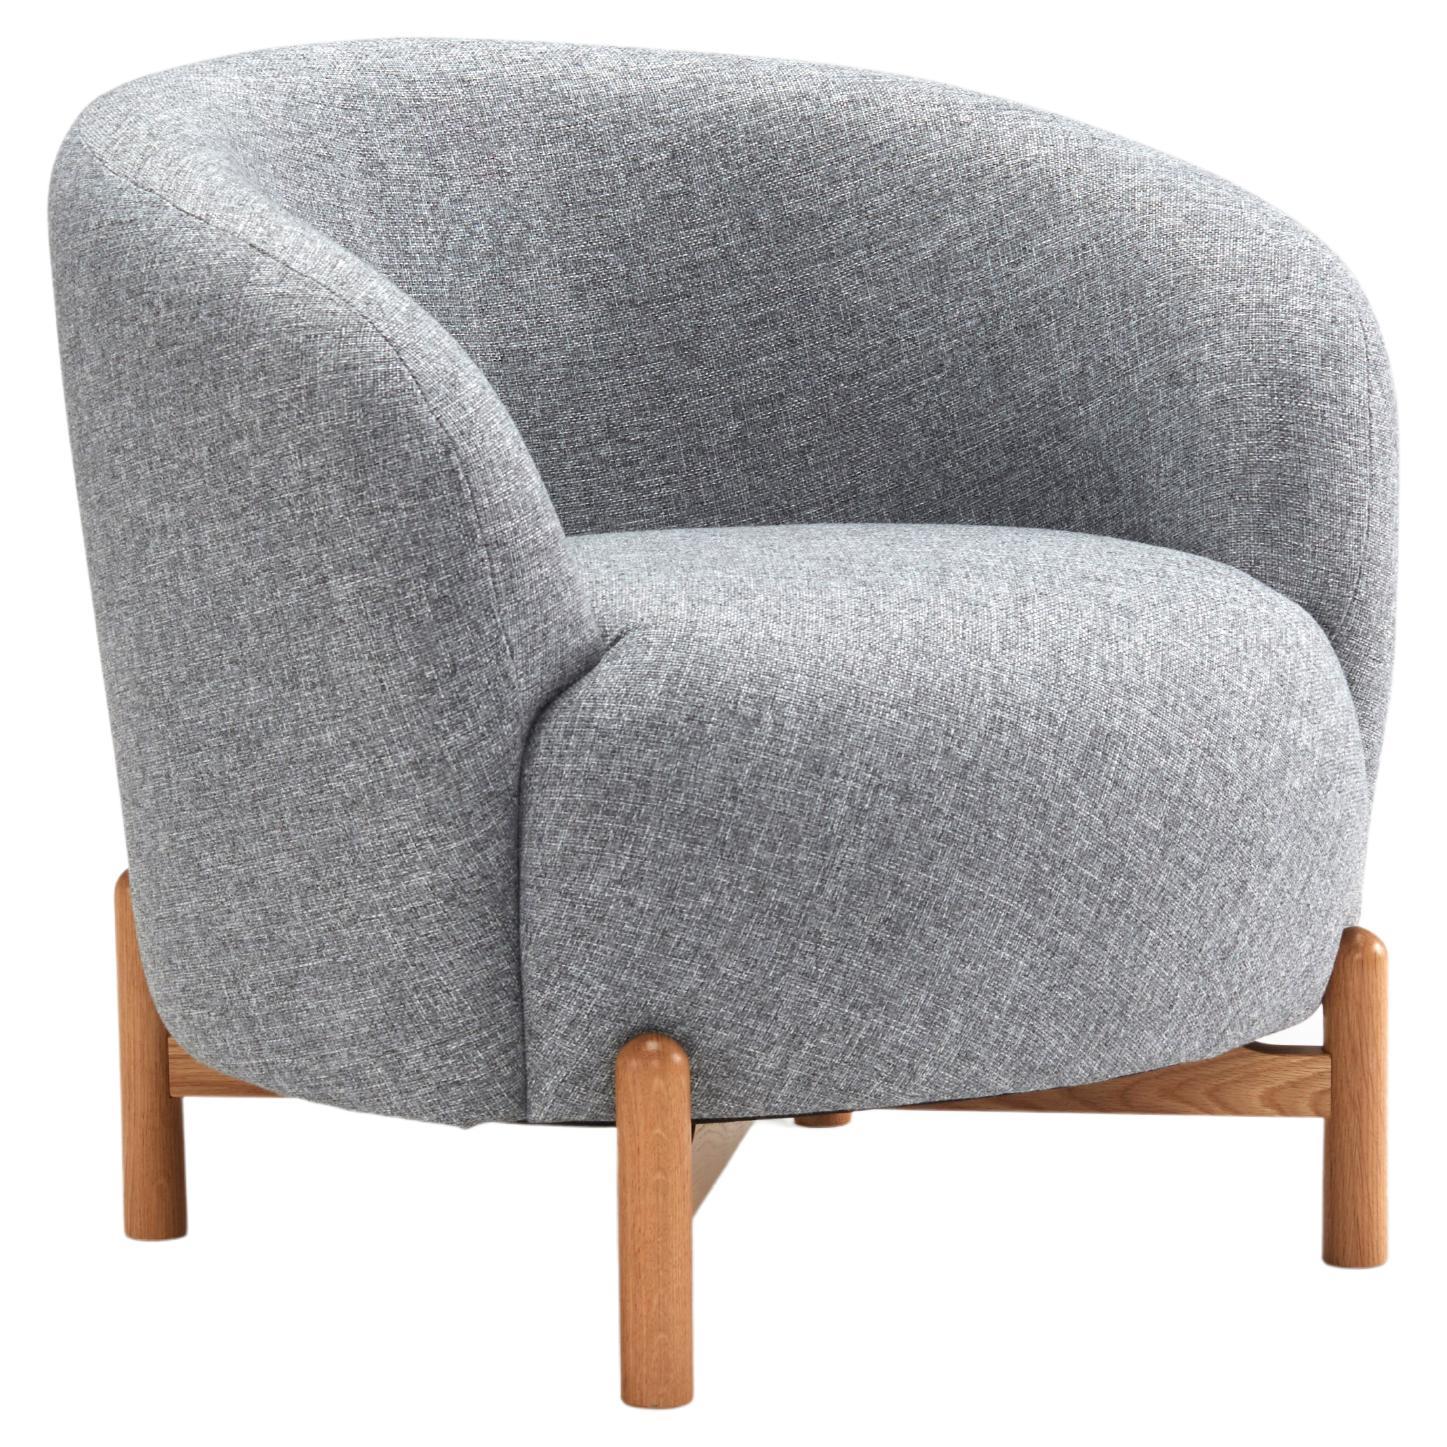 Hayche Glover Armchair - Wooden Base - Grey, UK, Made to Order